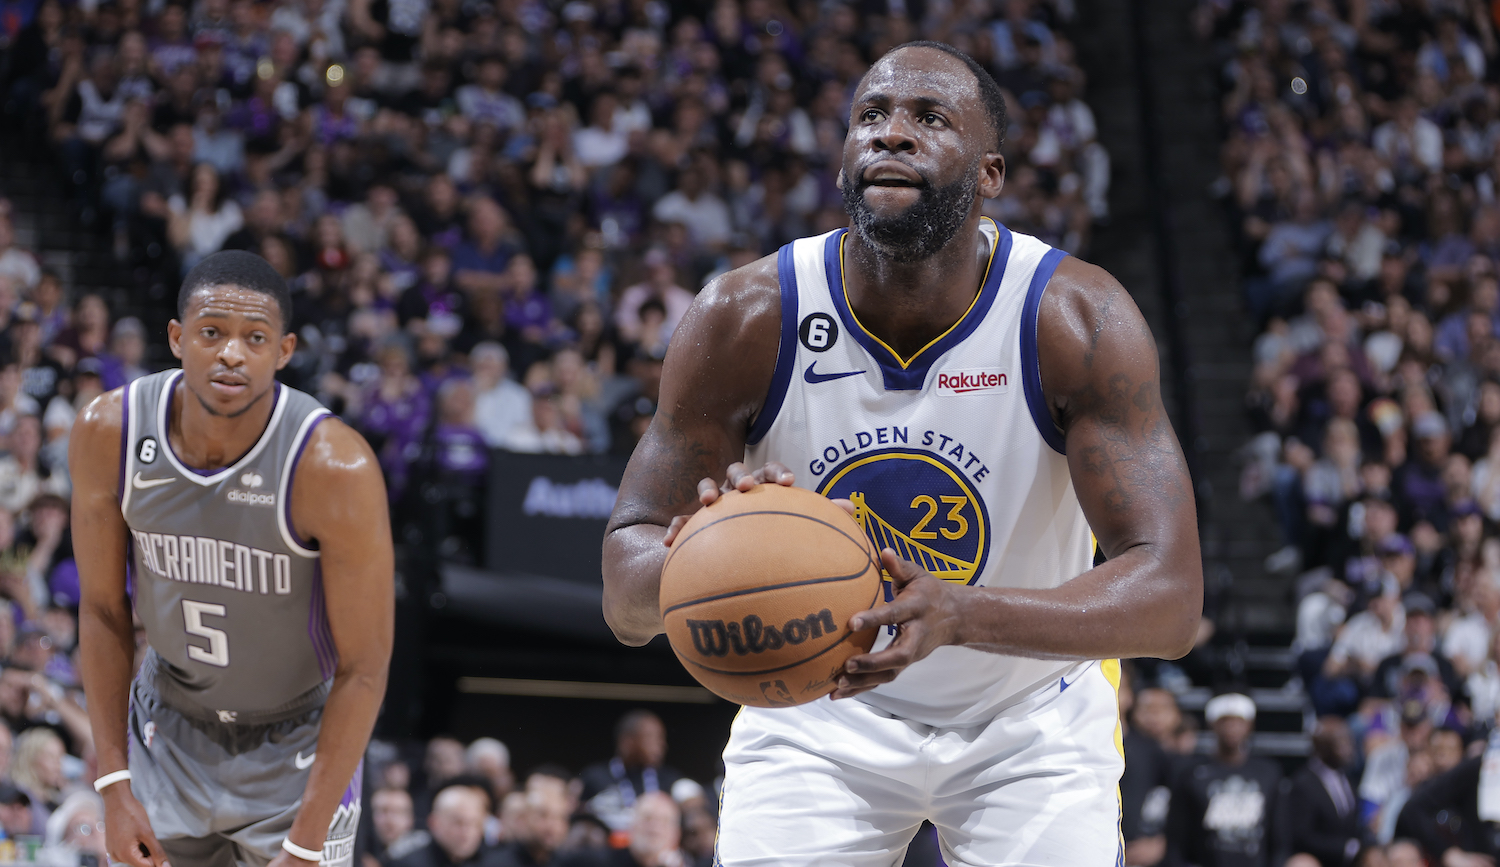 SACRAMENTO, CA - APRIL 26: Draymond Green #23 of the Golden State Warriors shoots a free throw during Round 1 Game 5 of the 2023 NBA Playoffs on April 26, 2023 at Golden 1 Center in Sacramento, California. NOTE TO USER: User expressly acknowledges and agrees that, by downloading and or using this Photograph, user is consenting to the terms and conditions of the Getty Images License Agreement. Mandatory Copyright Notice: Copyright 2023 NBAE (Photo by Rocky Widner/NBAE via Getty Images)